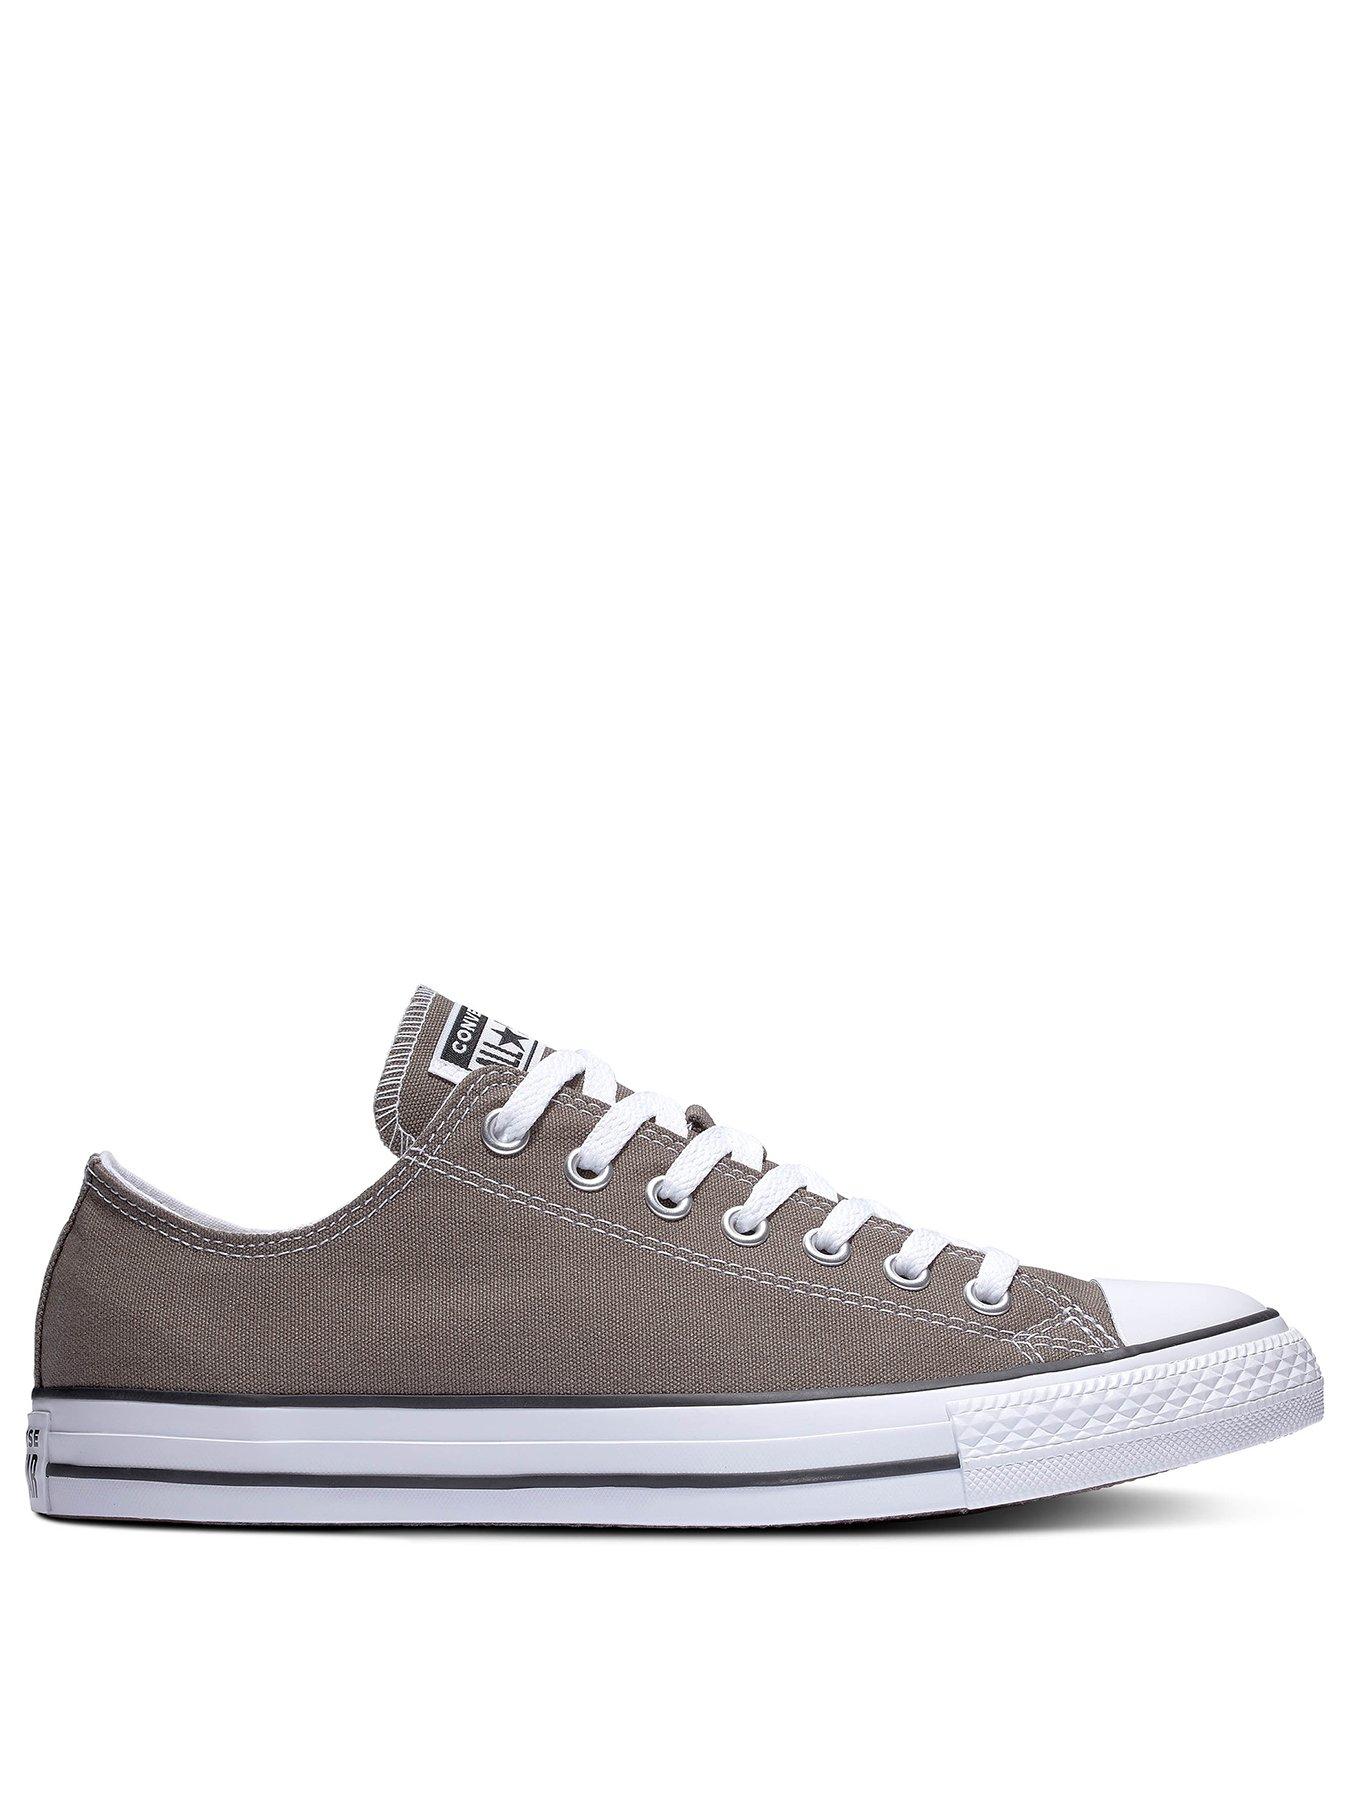 converse grey all star earthy buck ox trainers